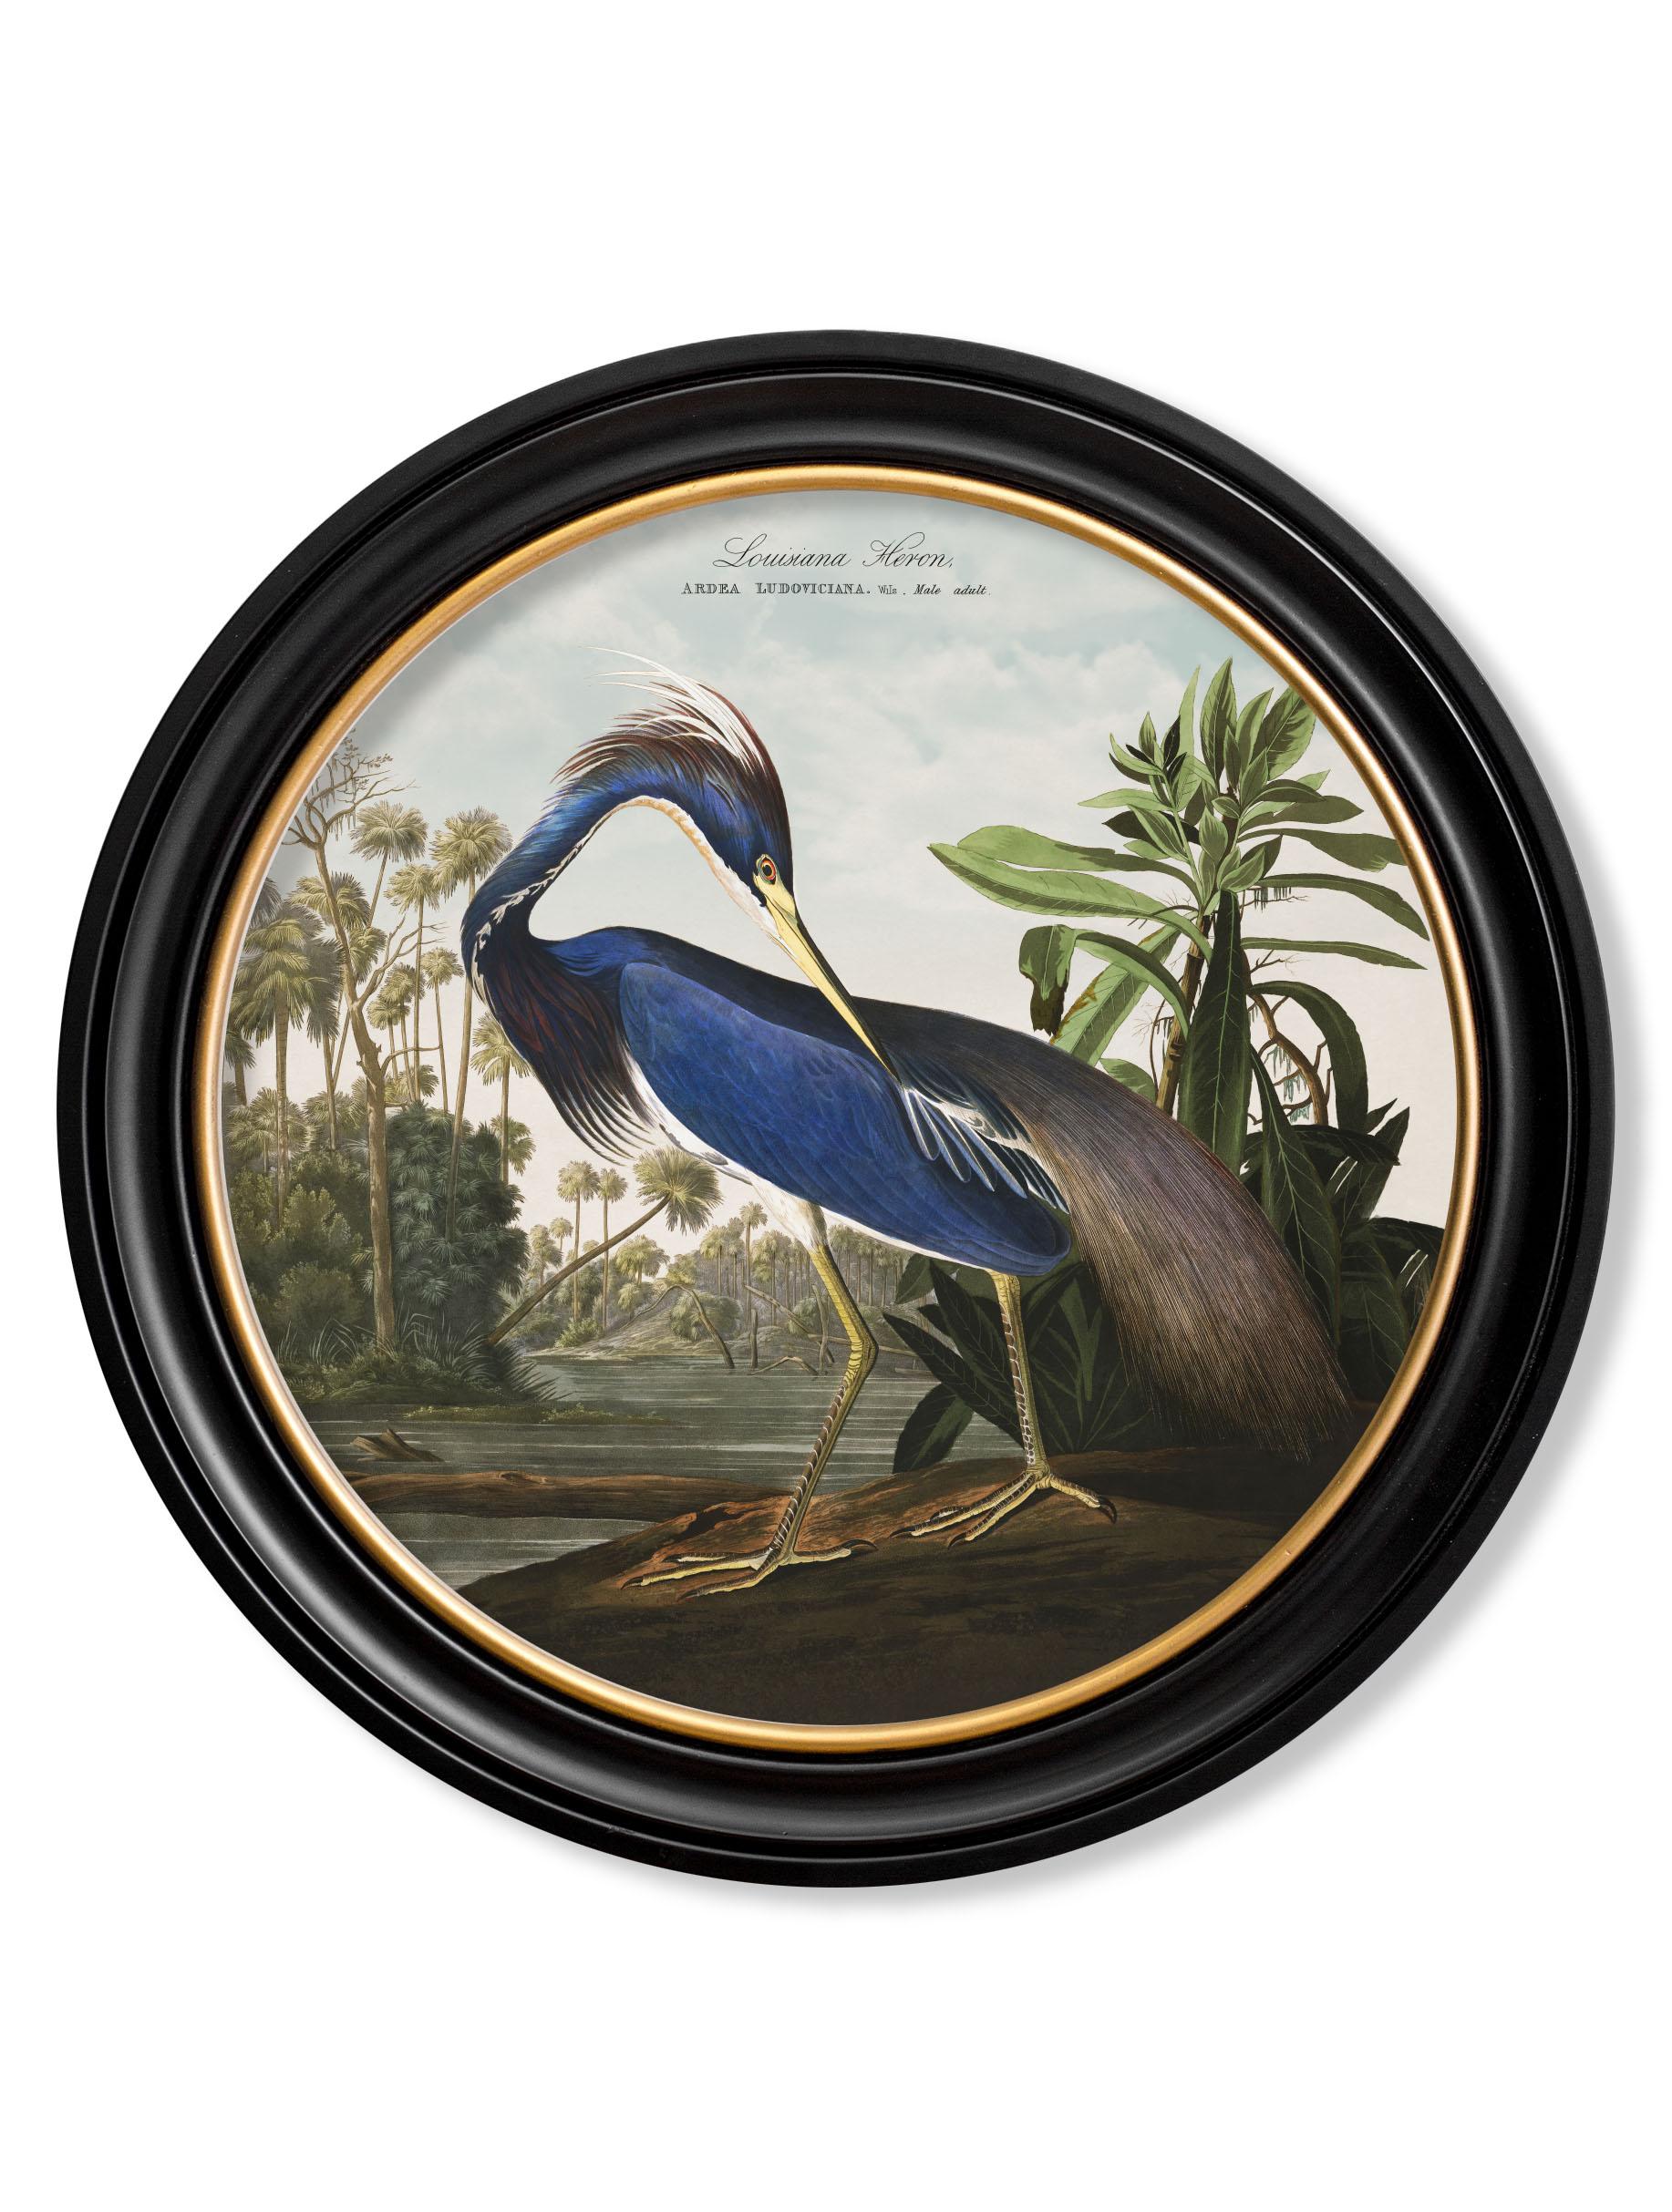 This is a digitally remastered print of a Louisiana Heron referenced from an Audubon Birds of America hand coloured print, originally from the 1800's

Prints of this style were originally printed in black and white and then hand painted over the